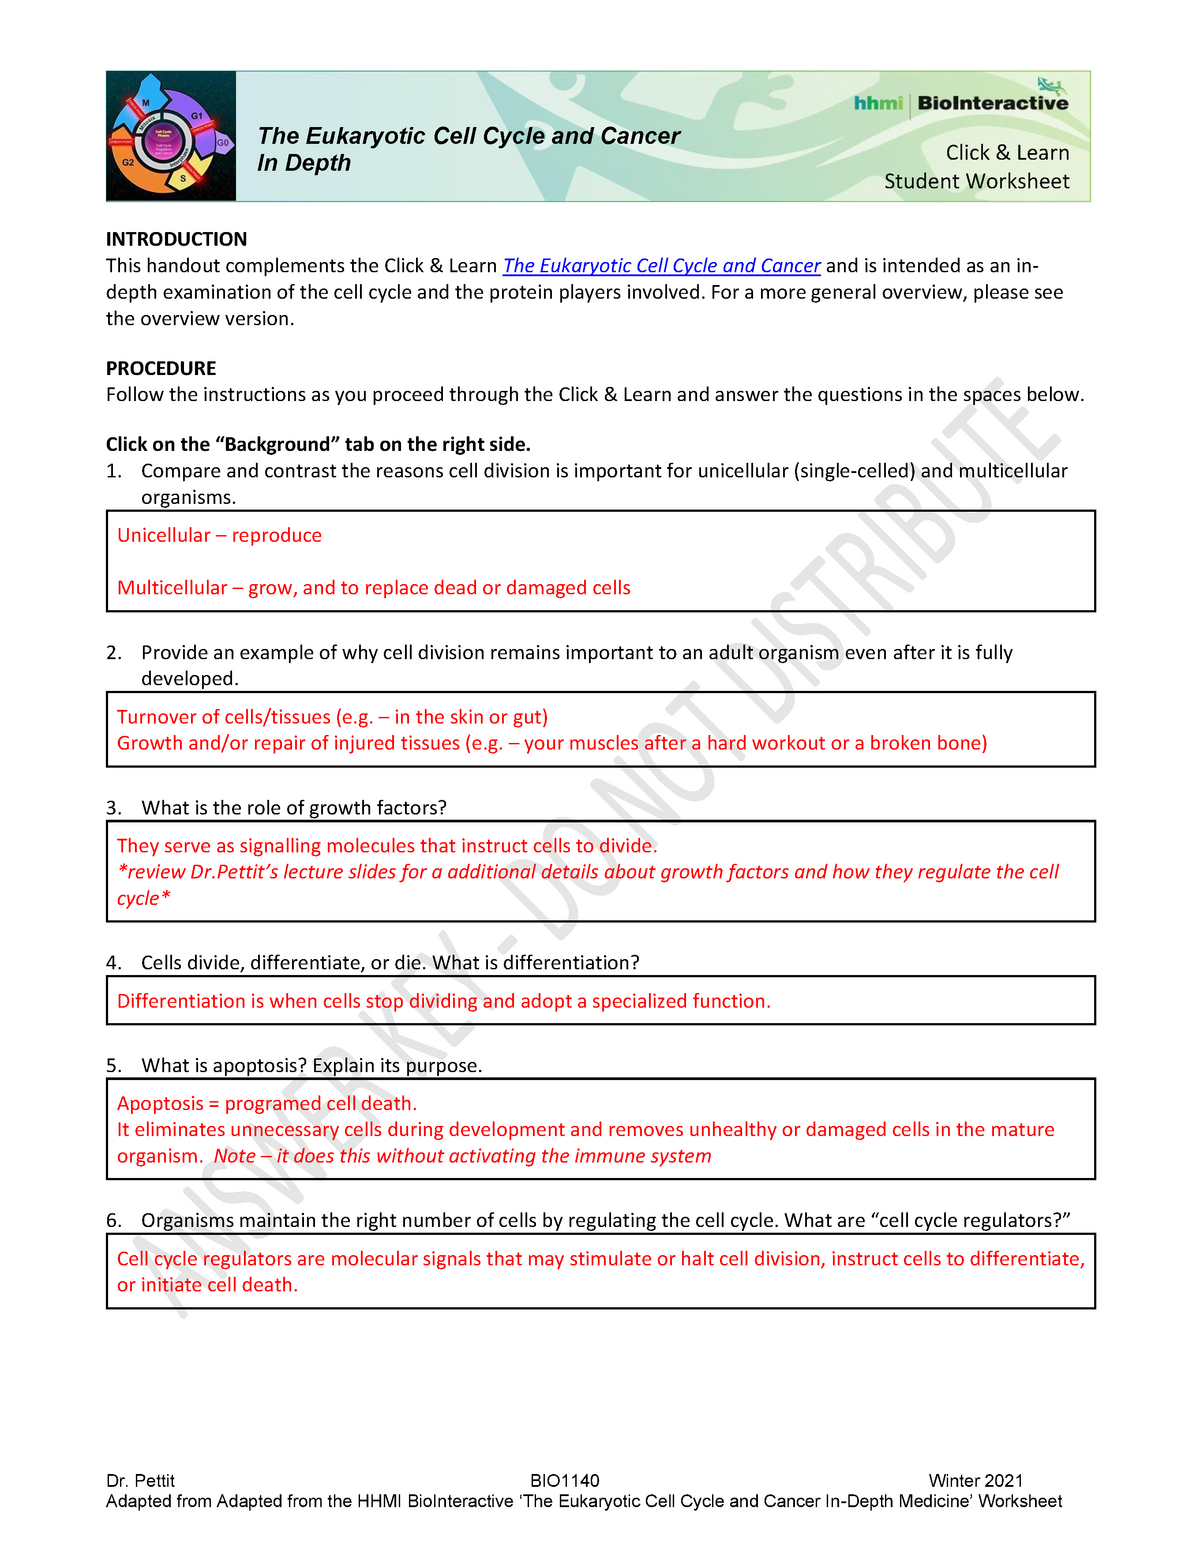 Biointeractive Student Worksheet Answers The Eukaryotic Cell Cycle And Cancer